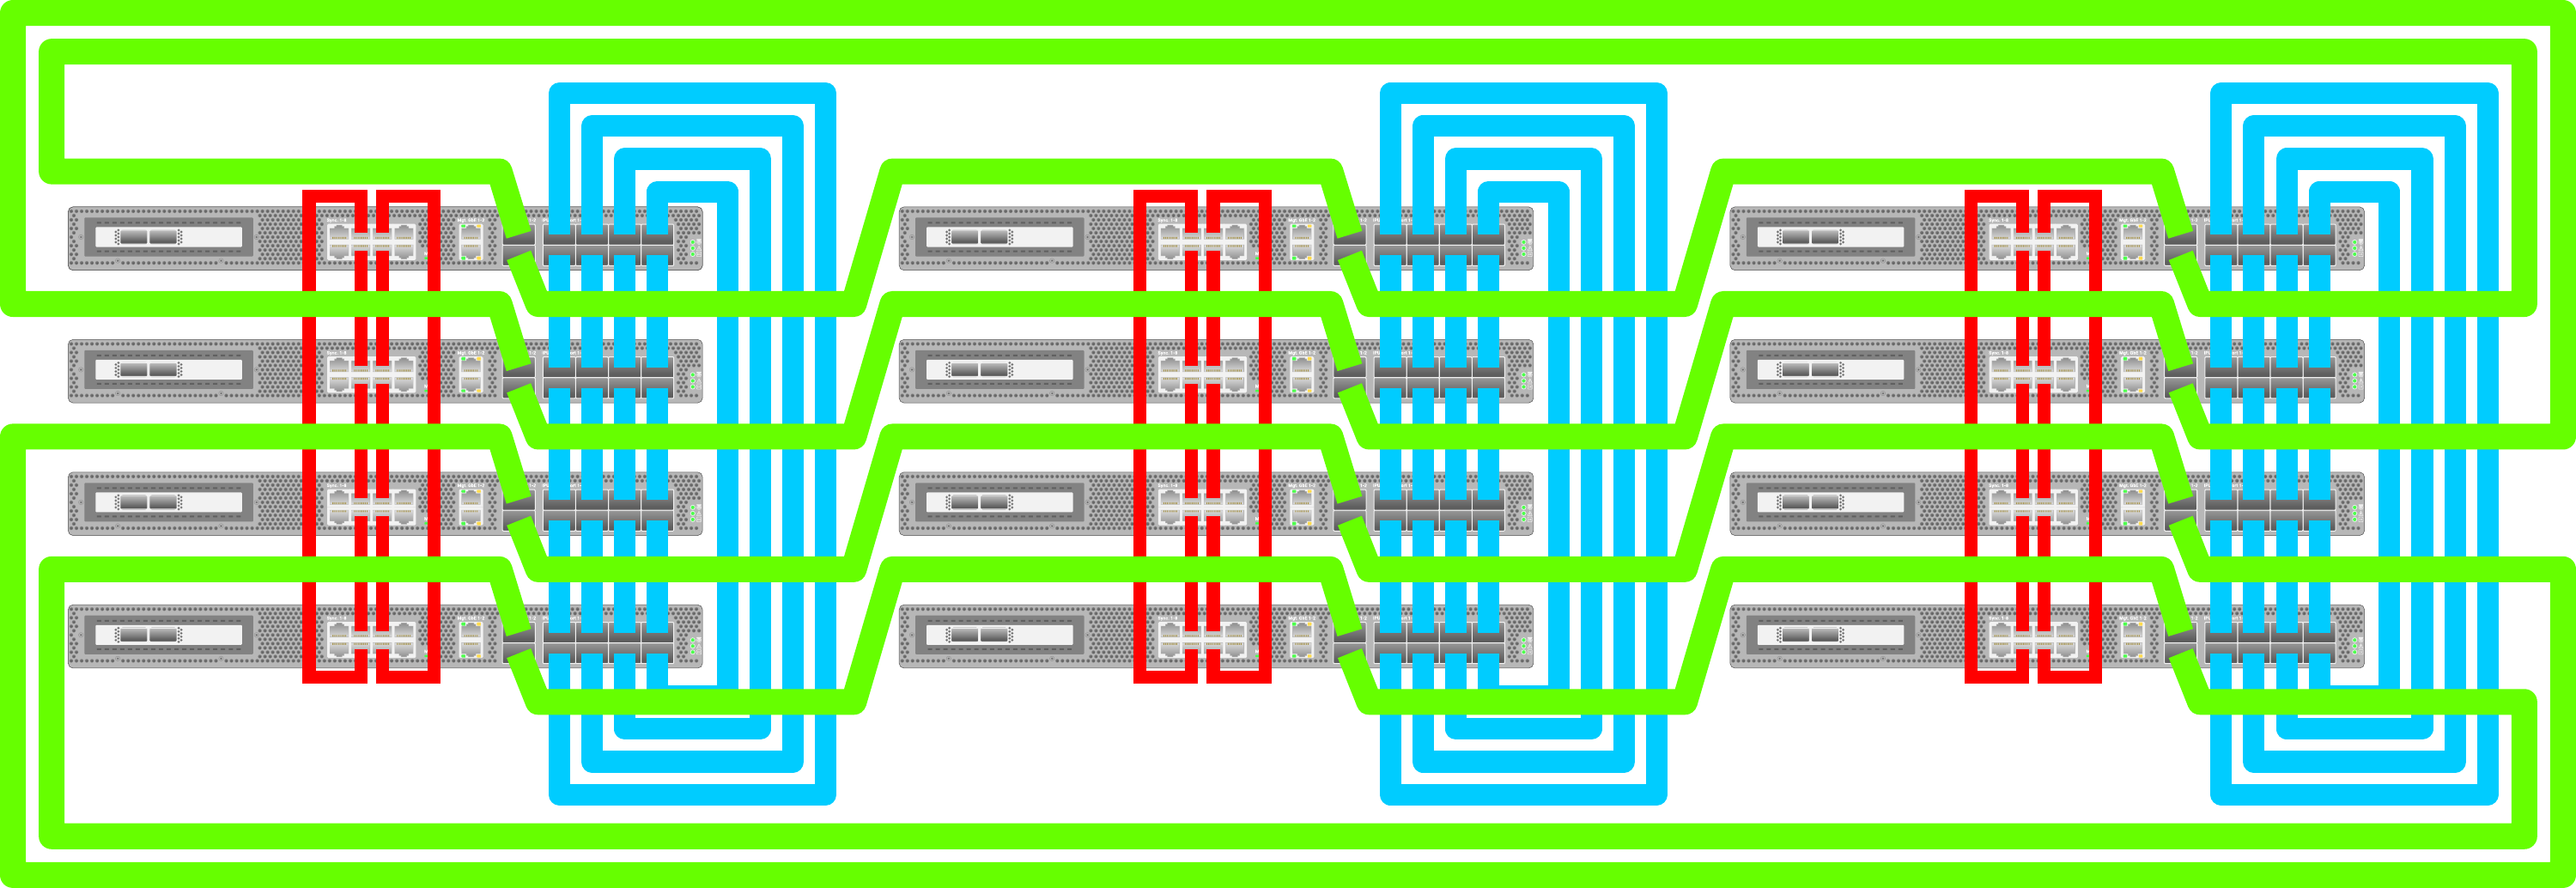 _images/Cabling-3x4-IPUMs.png